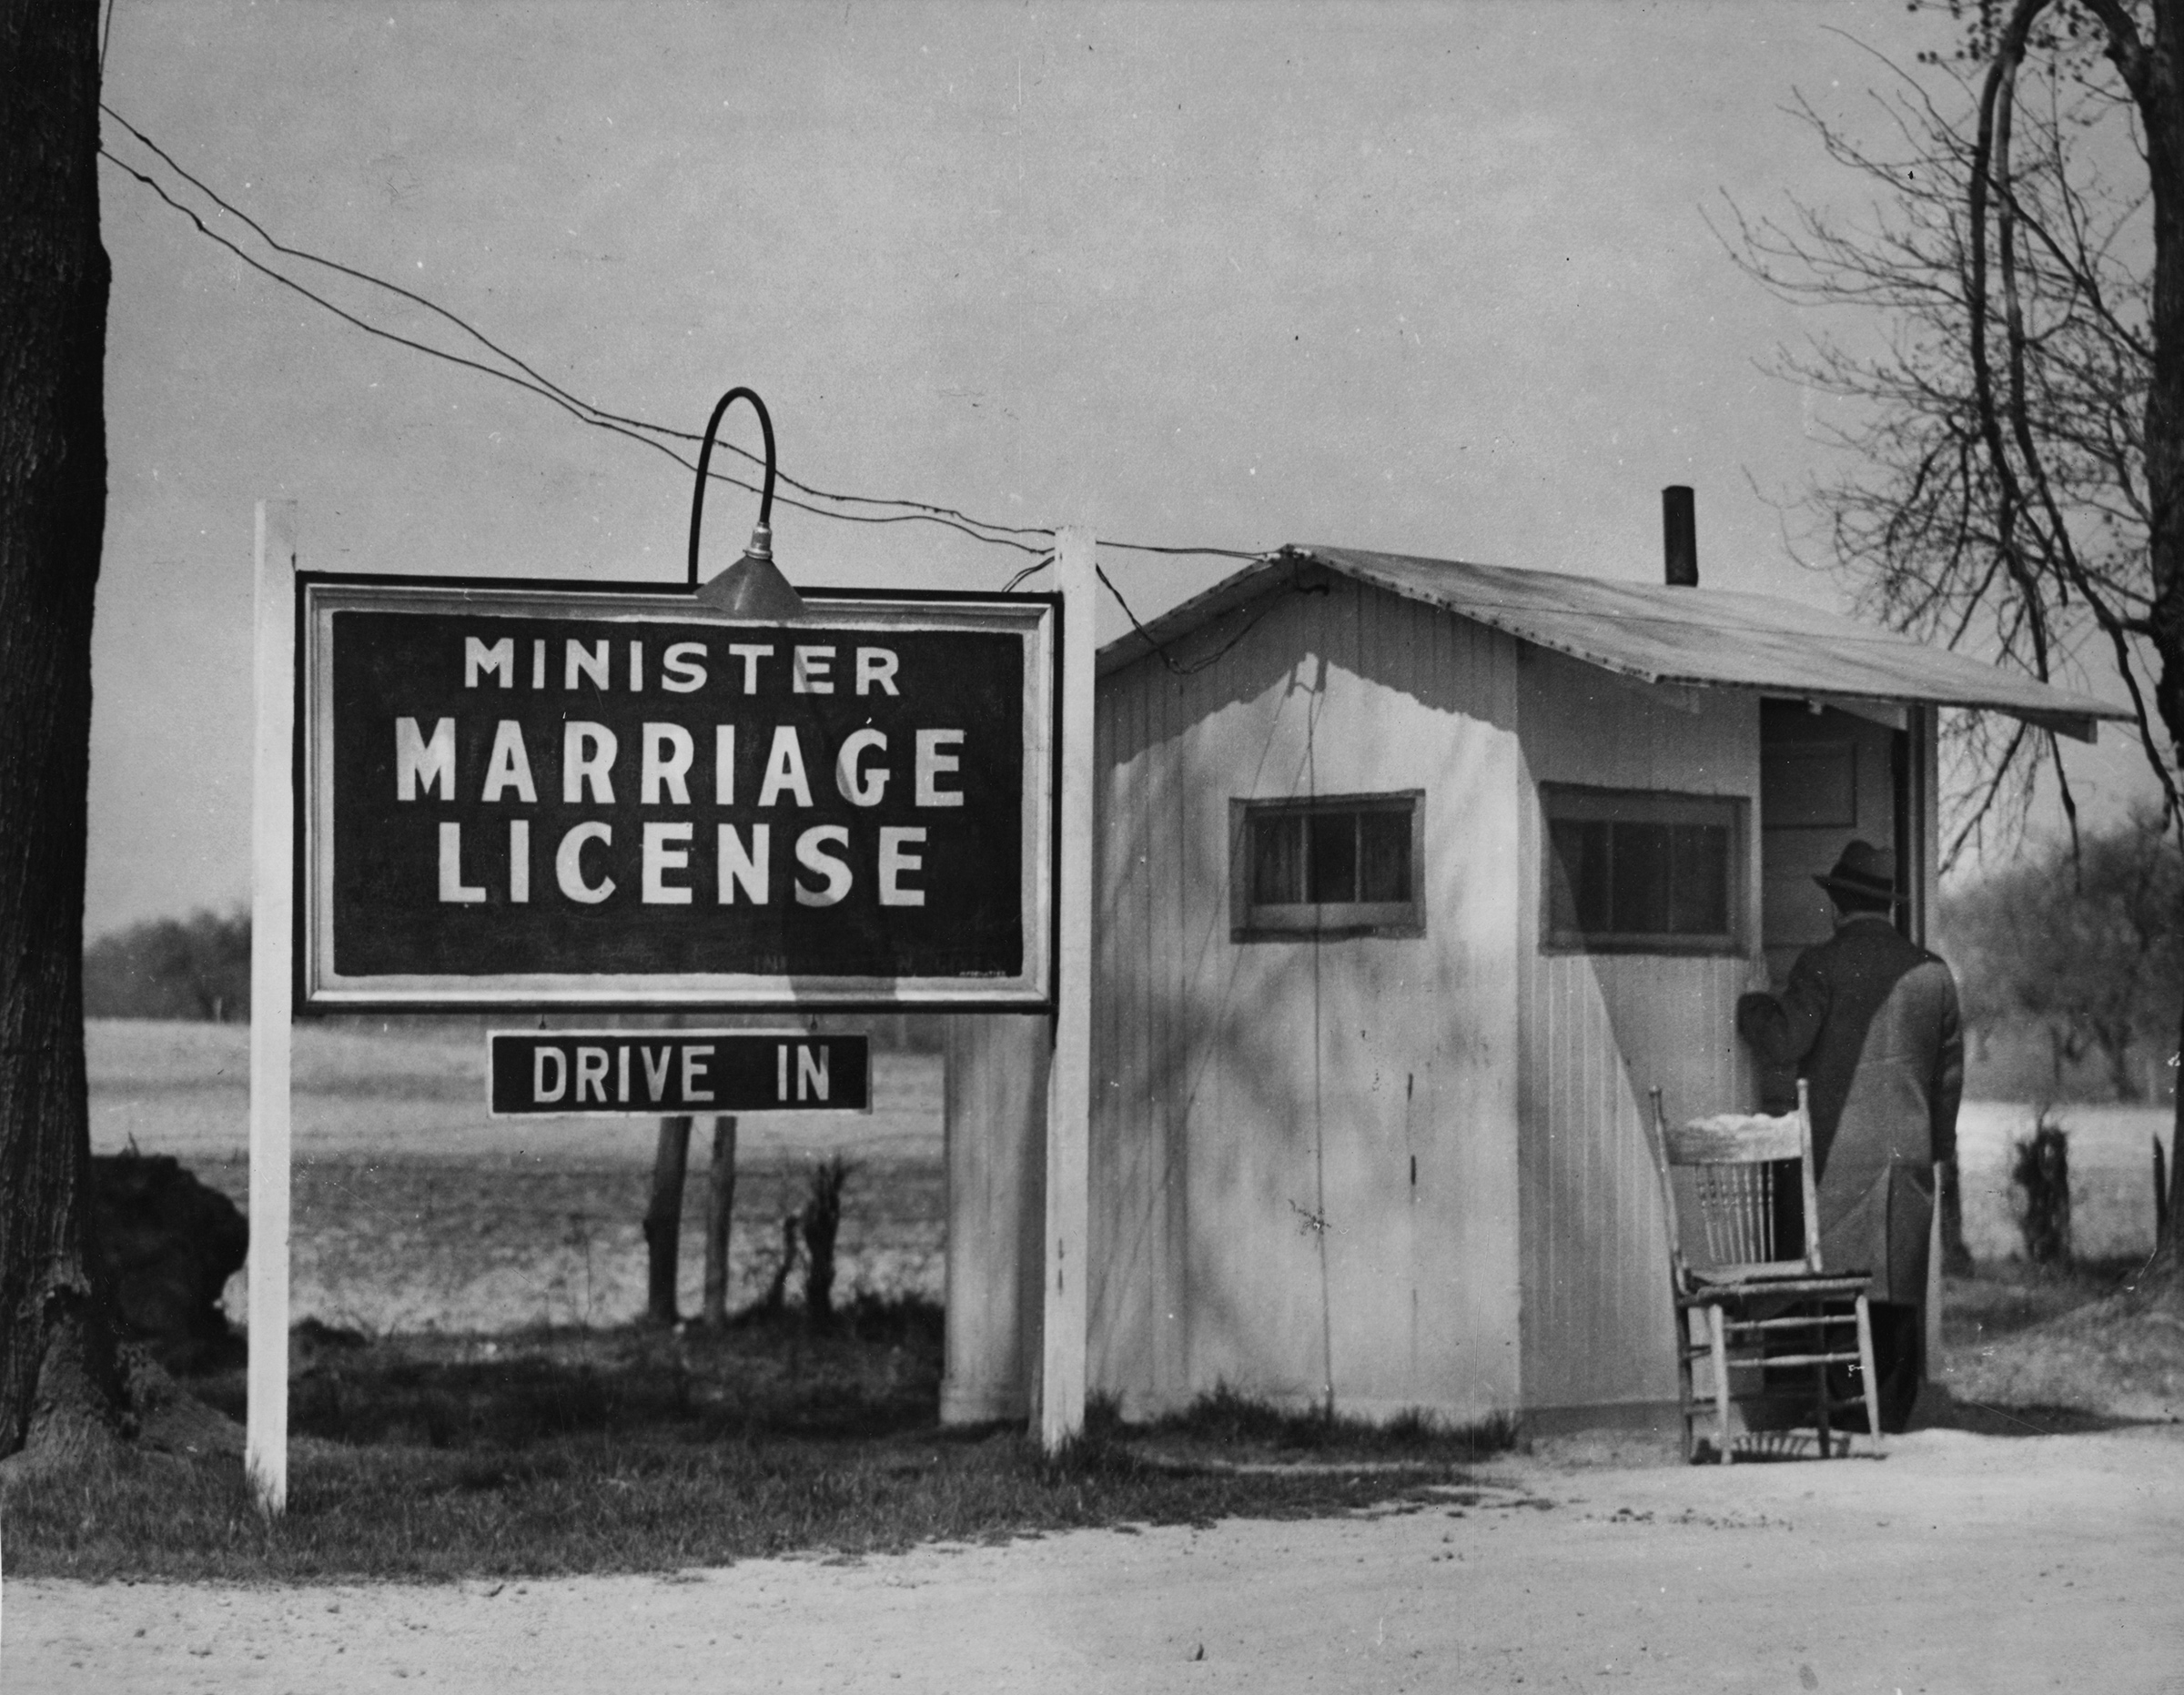 A walk-up customer at the door of a minister's marriage license booth in Elkton, Md. during the 1920-30s (Soibelman Syndicate/Visual Studies Workshop/Getty Image)